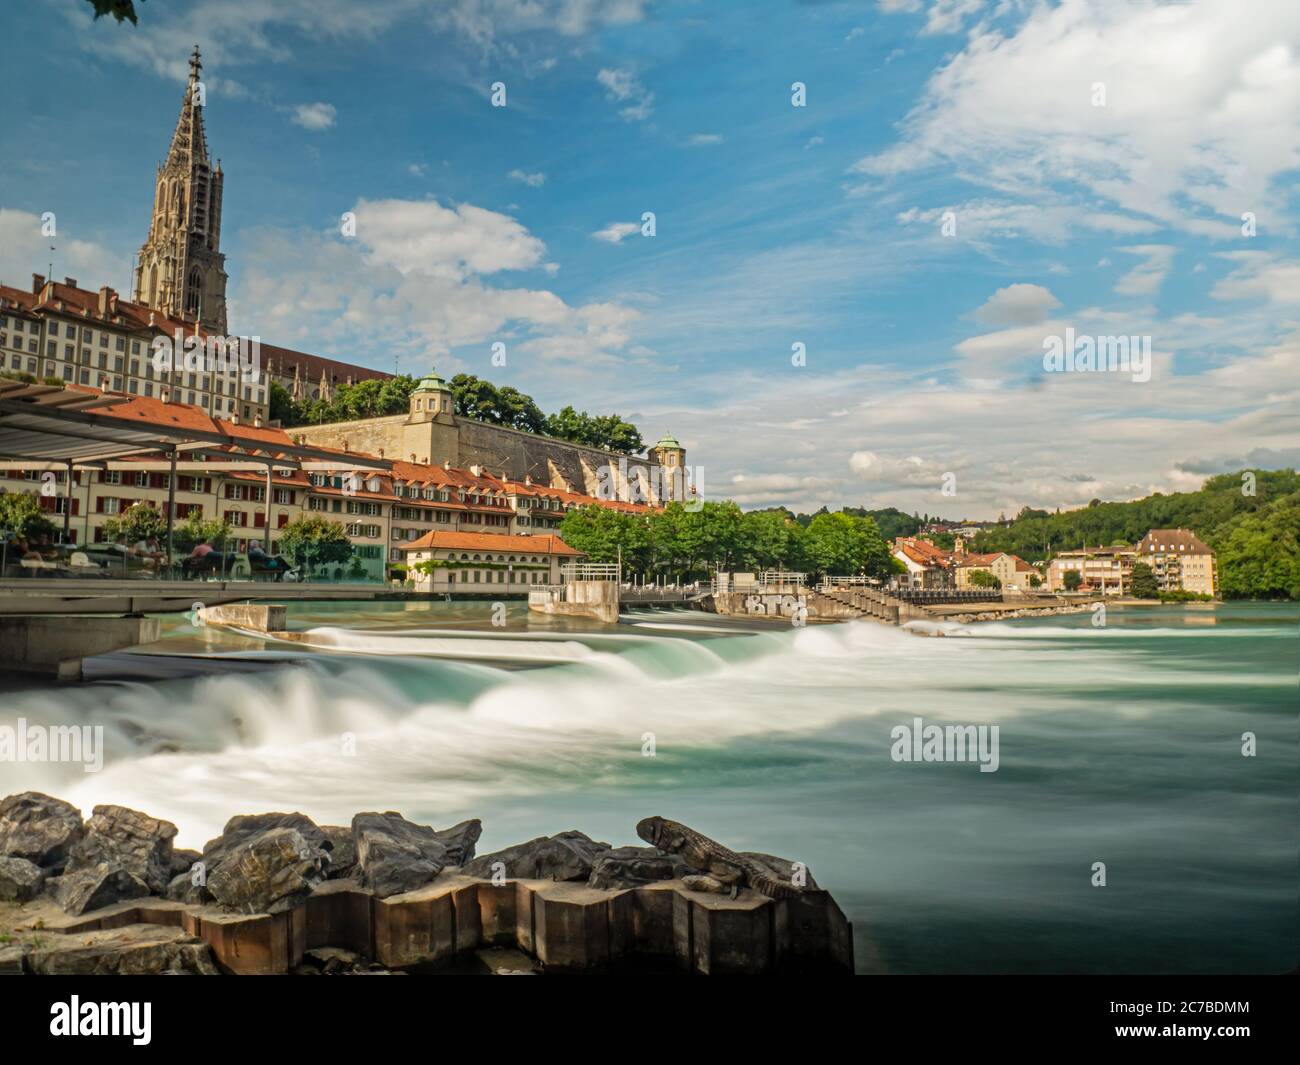 Long exposure, low angle shot of a fast flowing river and Parliament building in Bern, capital of Switzerland. Stock Photo